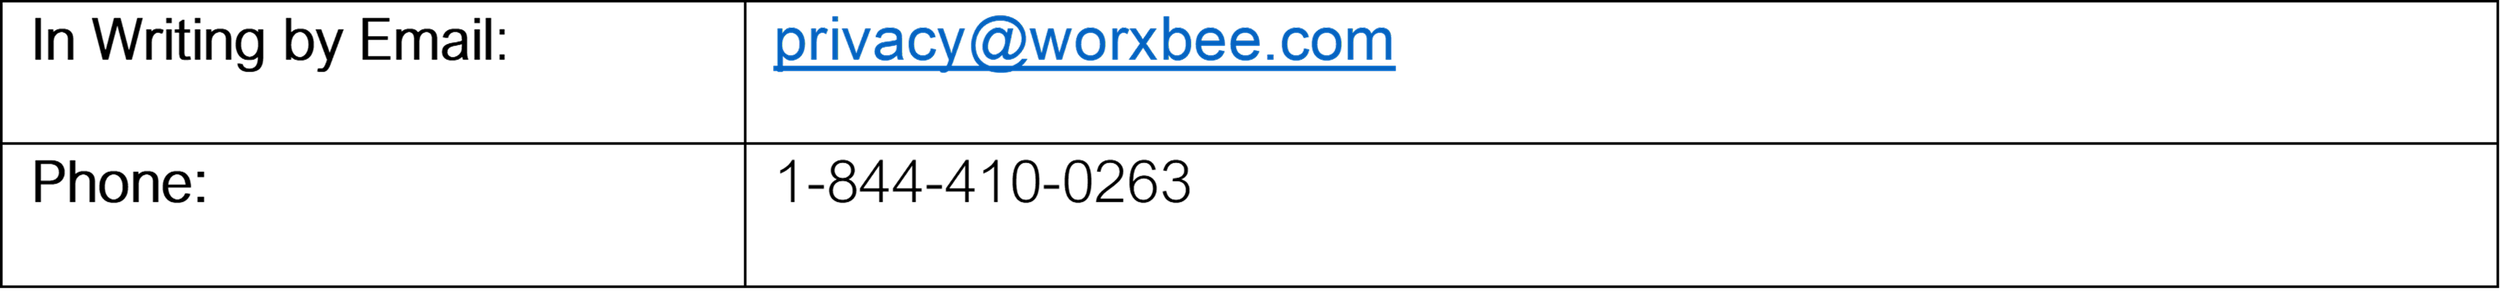 Worxbee privacy policy email contact is privacy@worxbee.com or call 1-844-410-0263